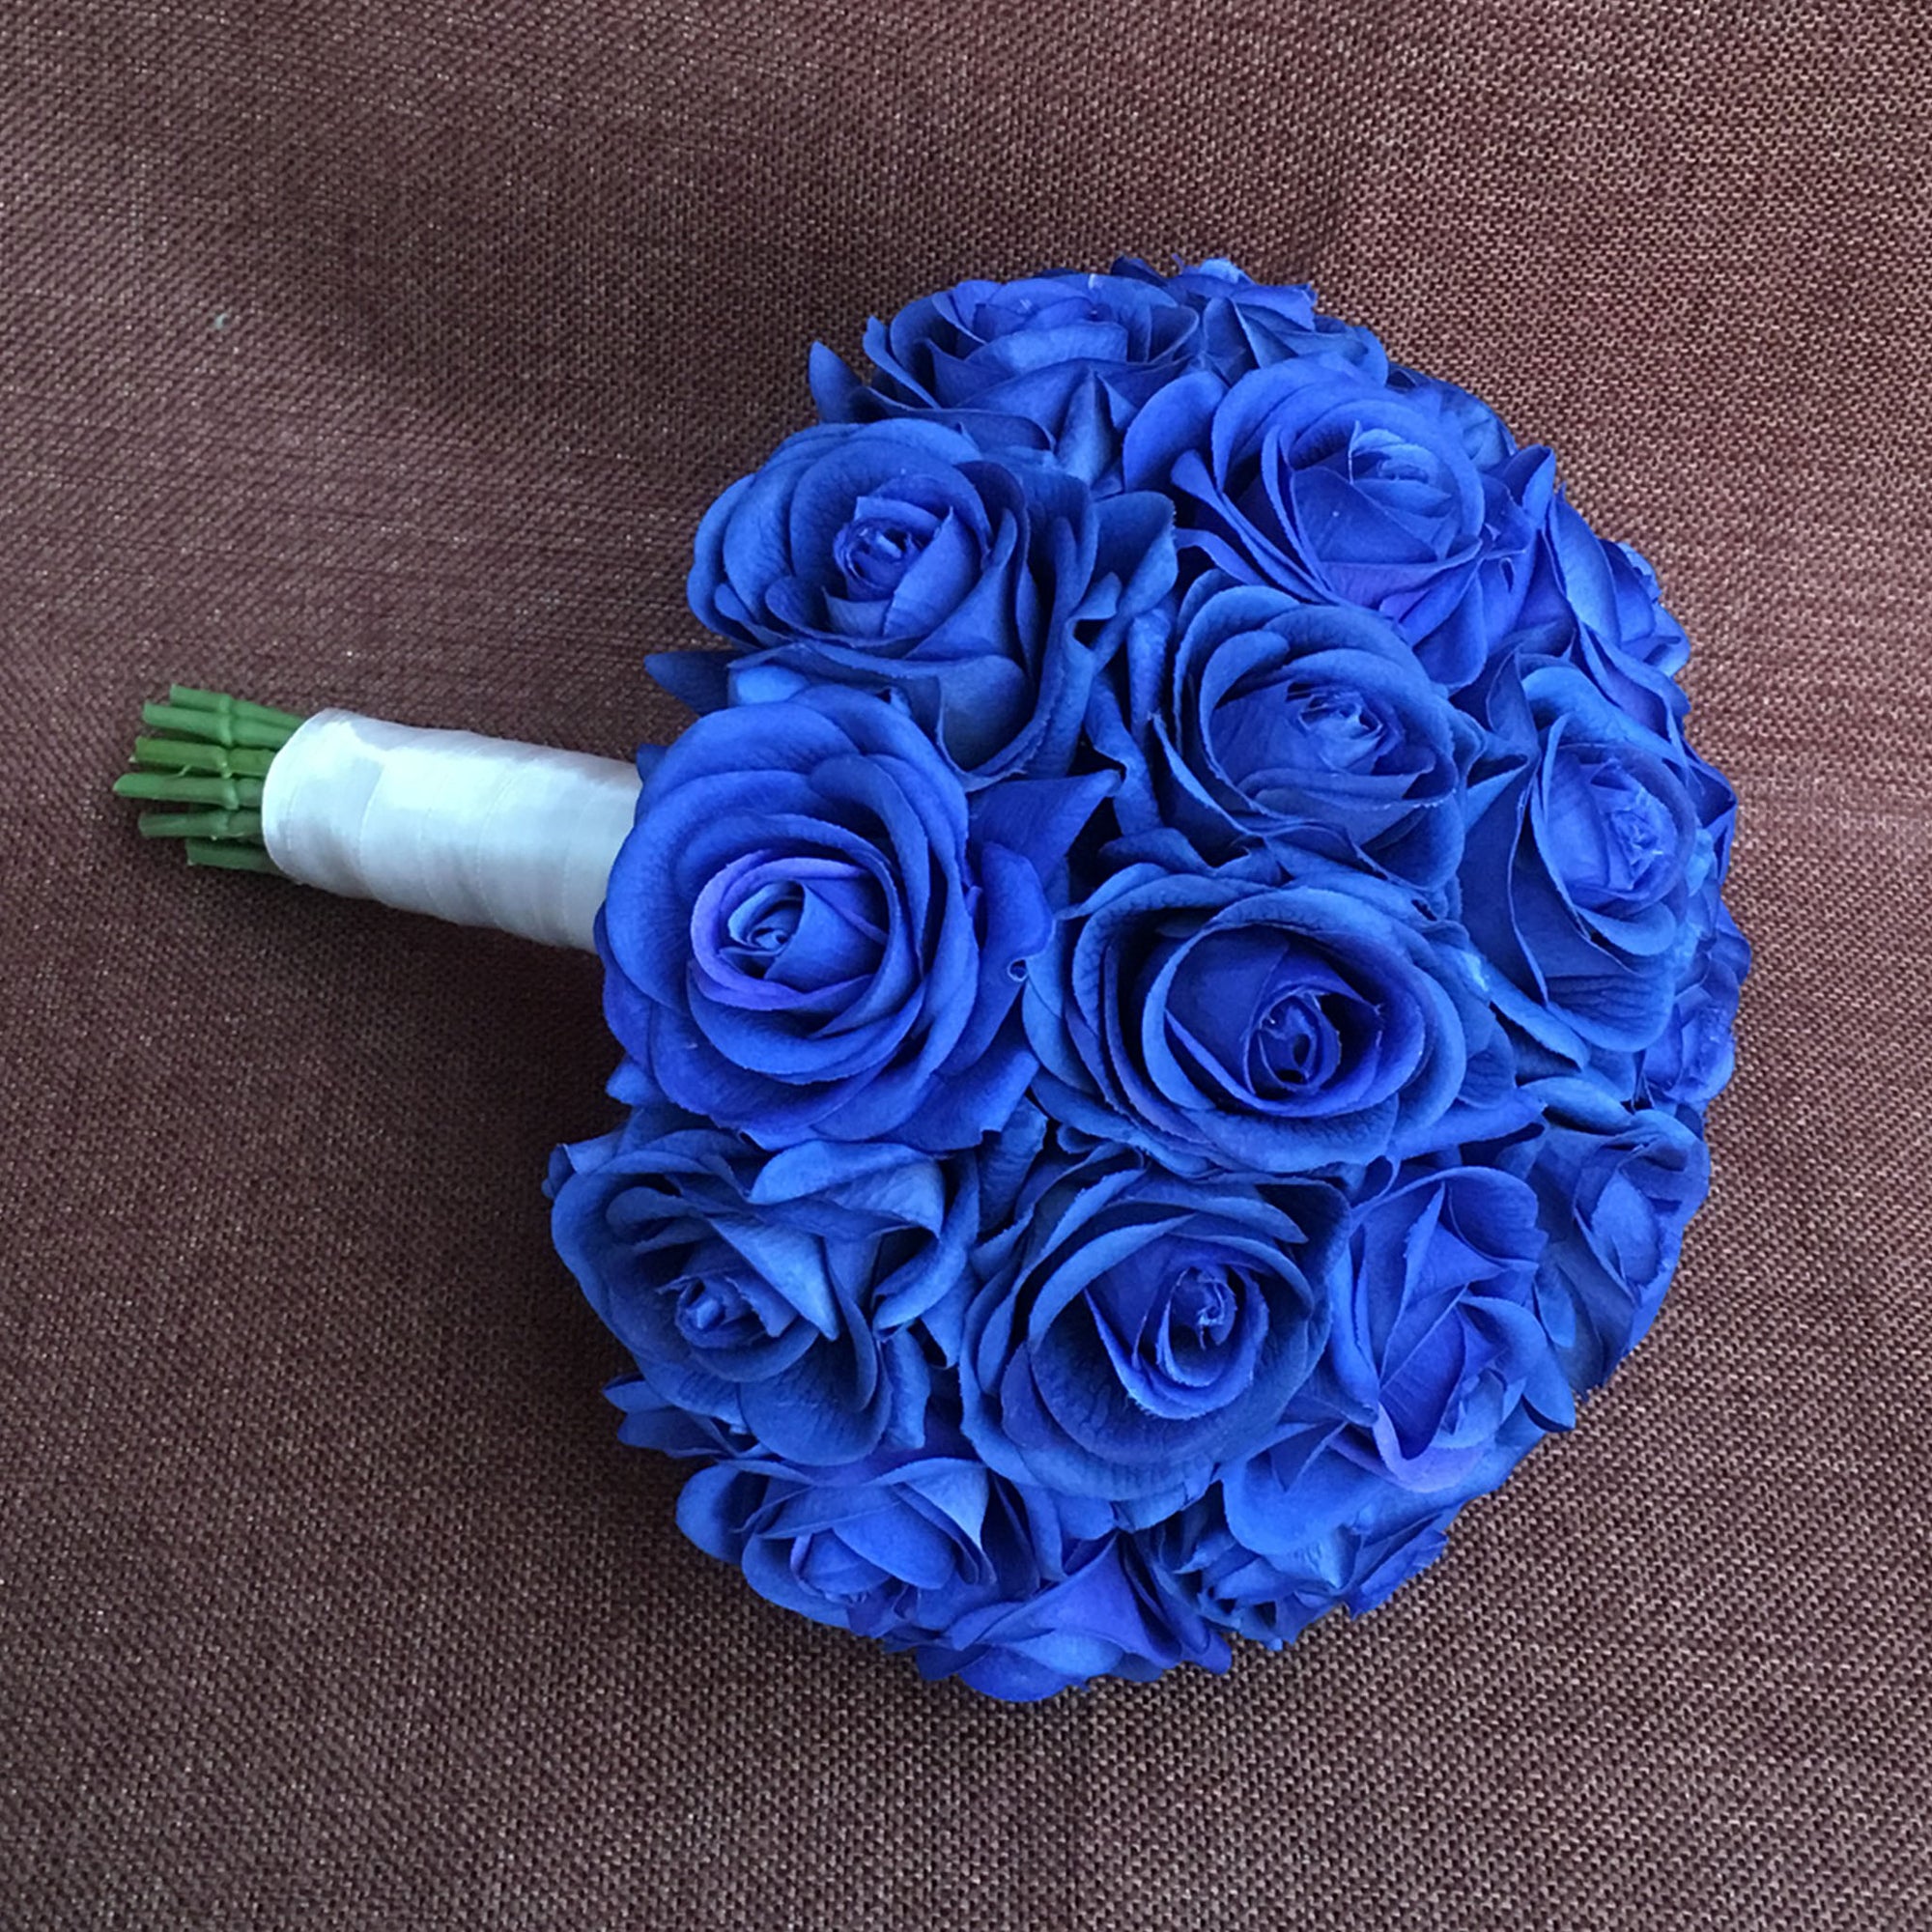 Real Touch Bridal Bouquet Royal Blue Wedding Flowers Boutonnieres Corsages Sets